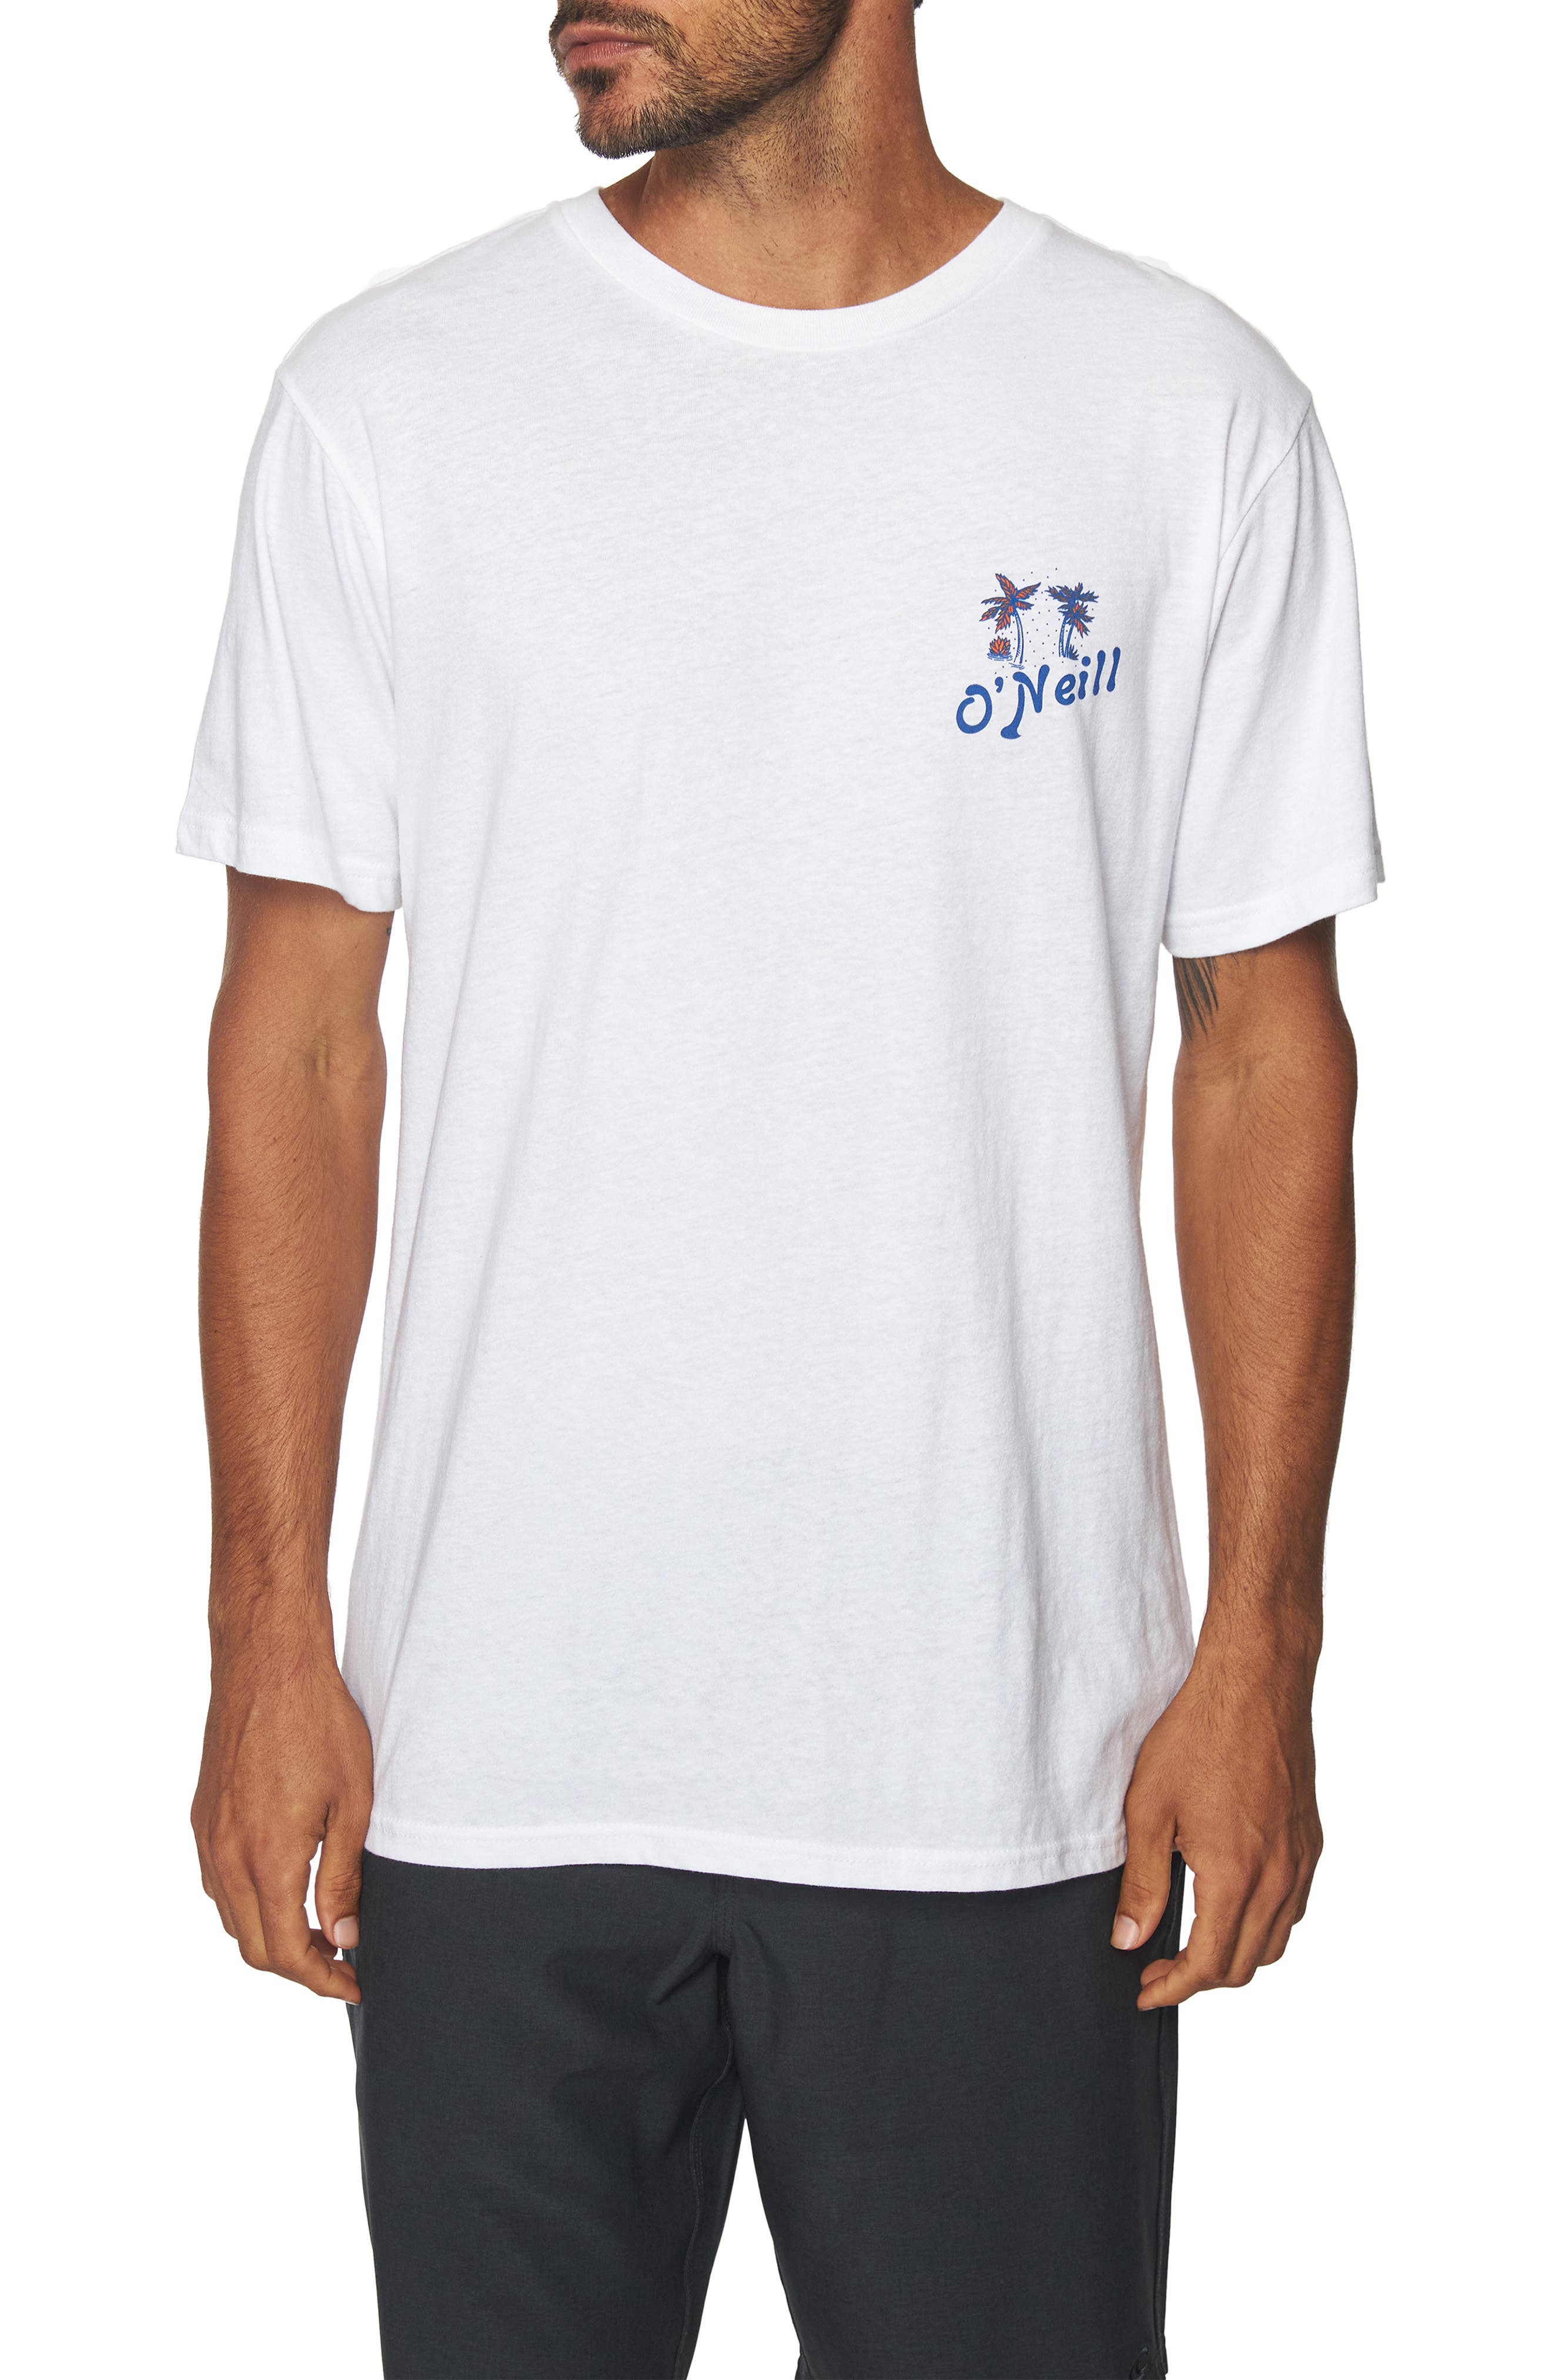 ONeill Ocotillo Tee Canteloupe Oneill Men's Clothing T-Shirts